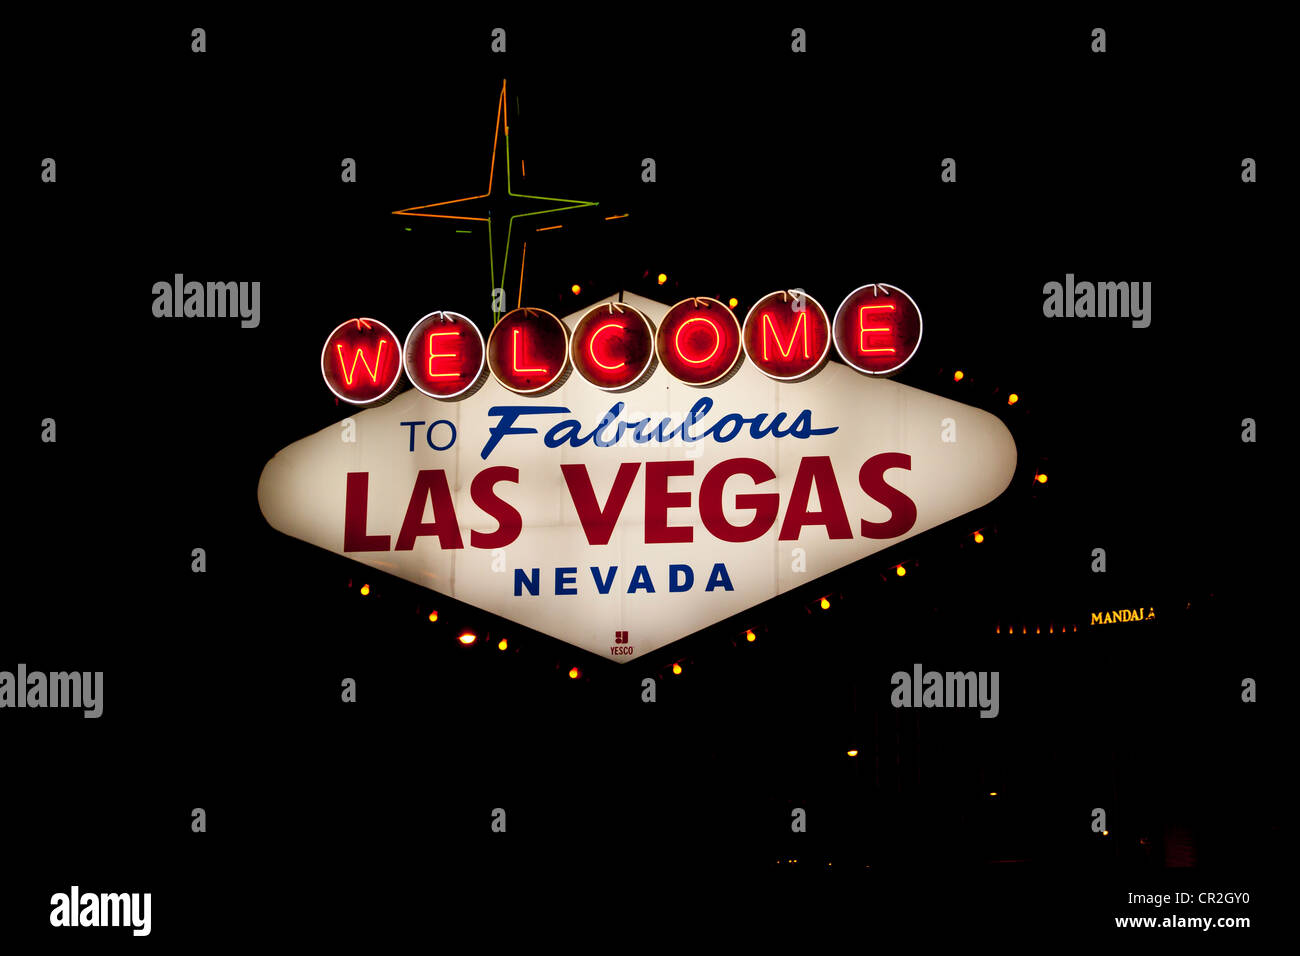 The famous welcome to fabulous Las Vegas neon sign as you enter Las Vegas at night with Mandalay Bay Hotel  and casino behind. Stock Photo